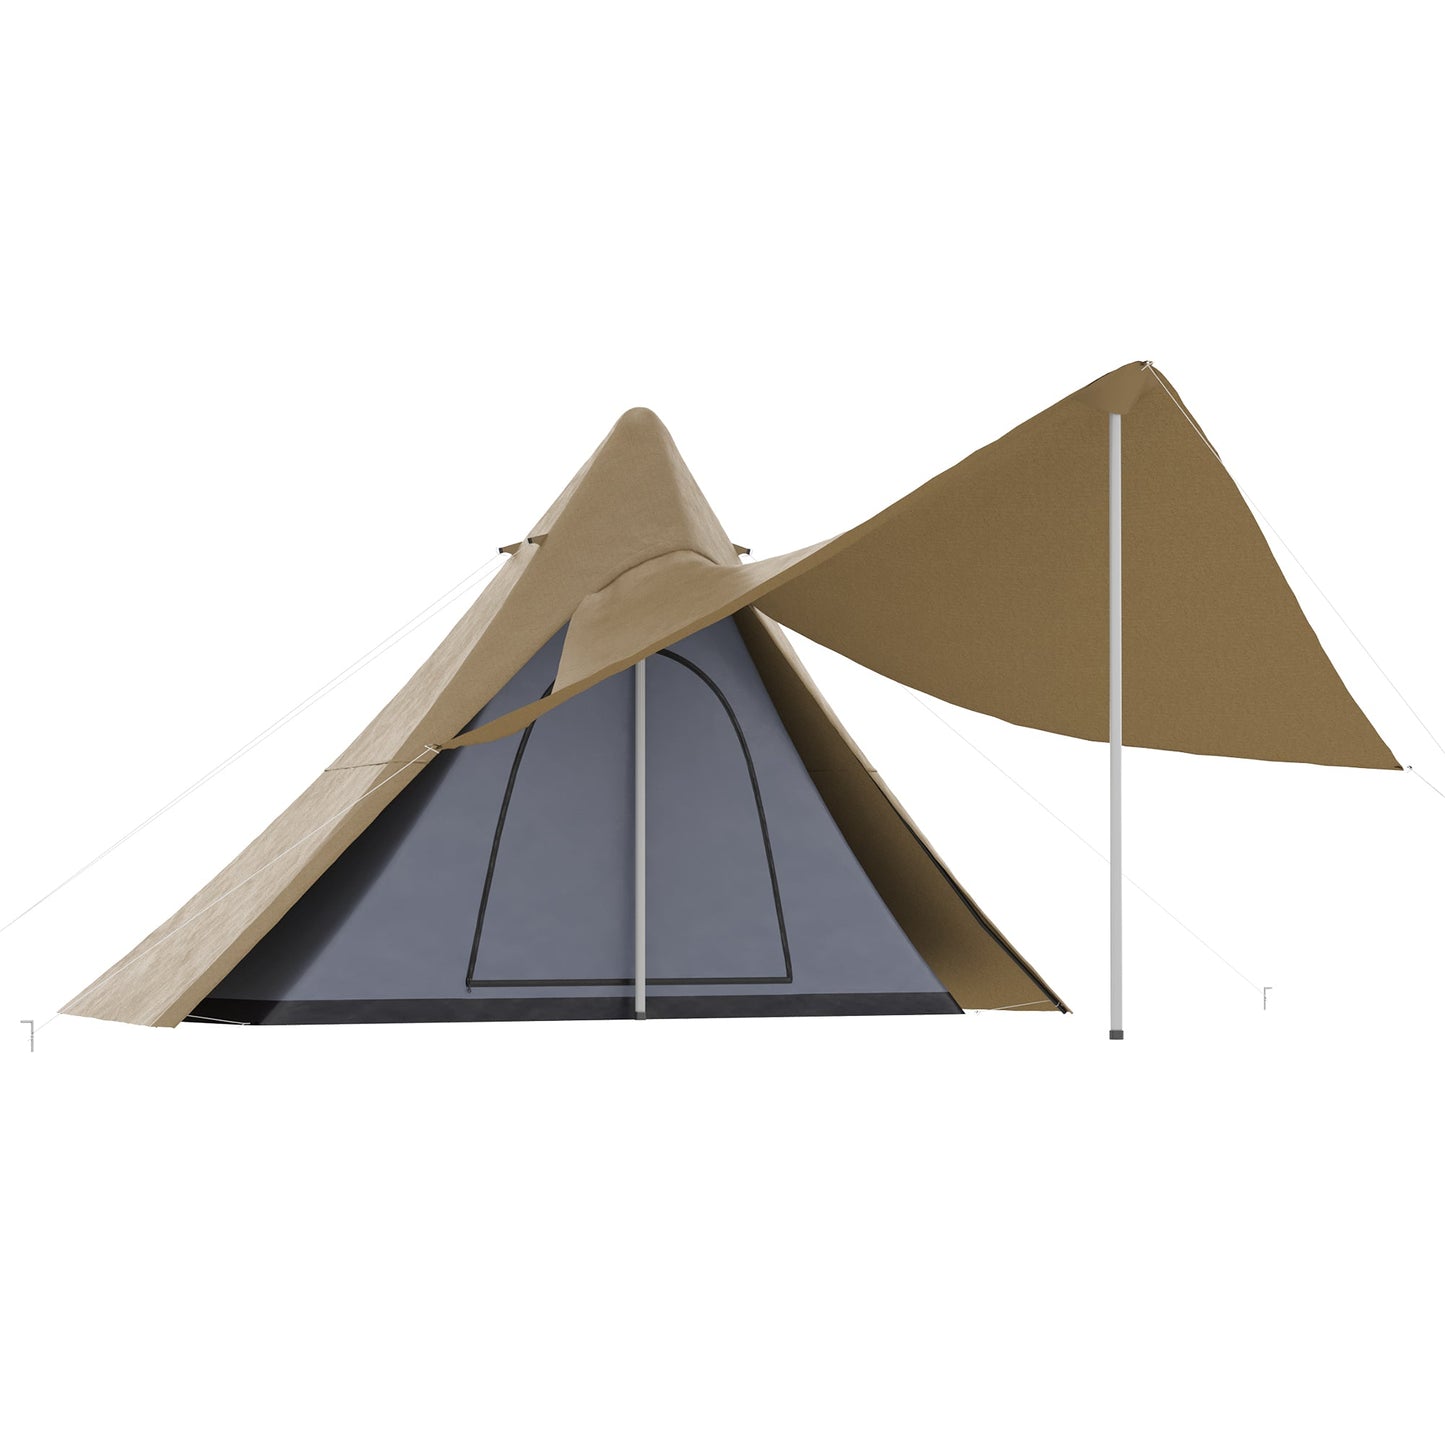 Outdoor and Garden-Teepee Tent, Easy Set-Up Camping Tent with Porch Area, Floor and Carry Bag, for 2-3 Person Outdoor Backpacking Camping Hiking, Coffee - Outdoor Style Company